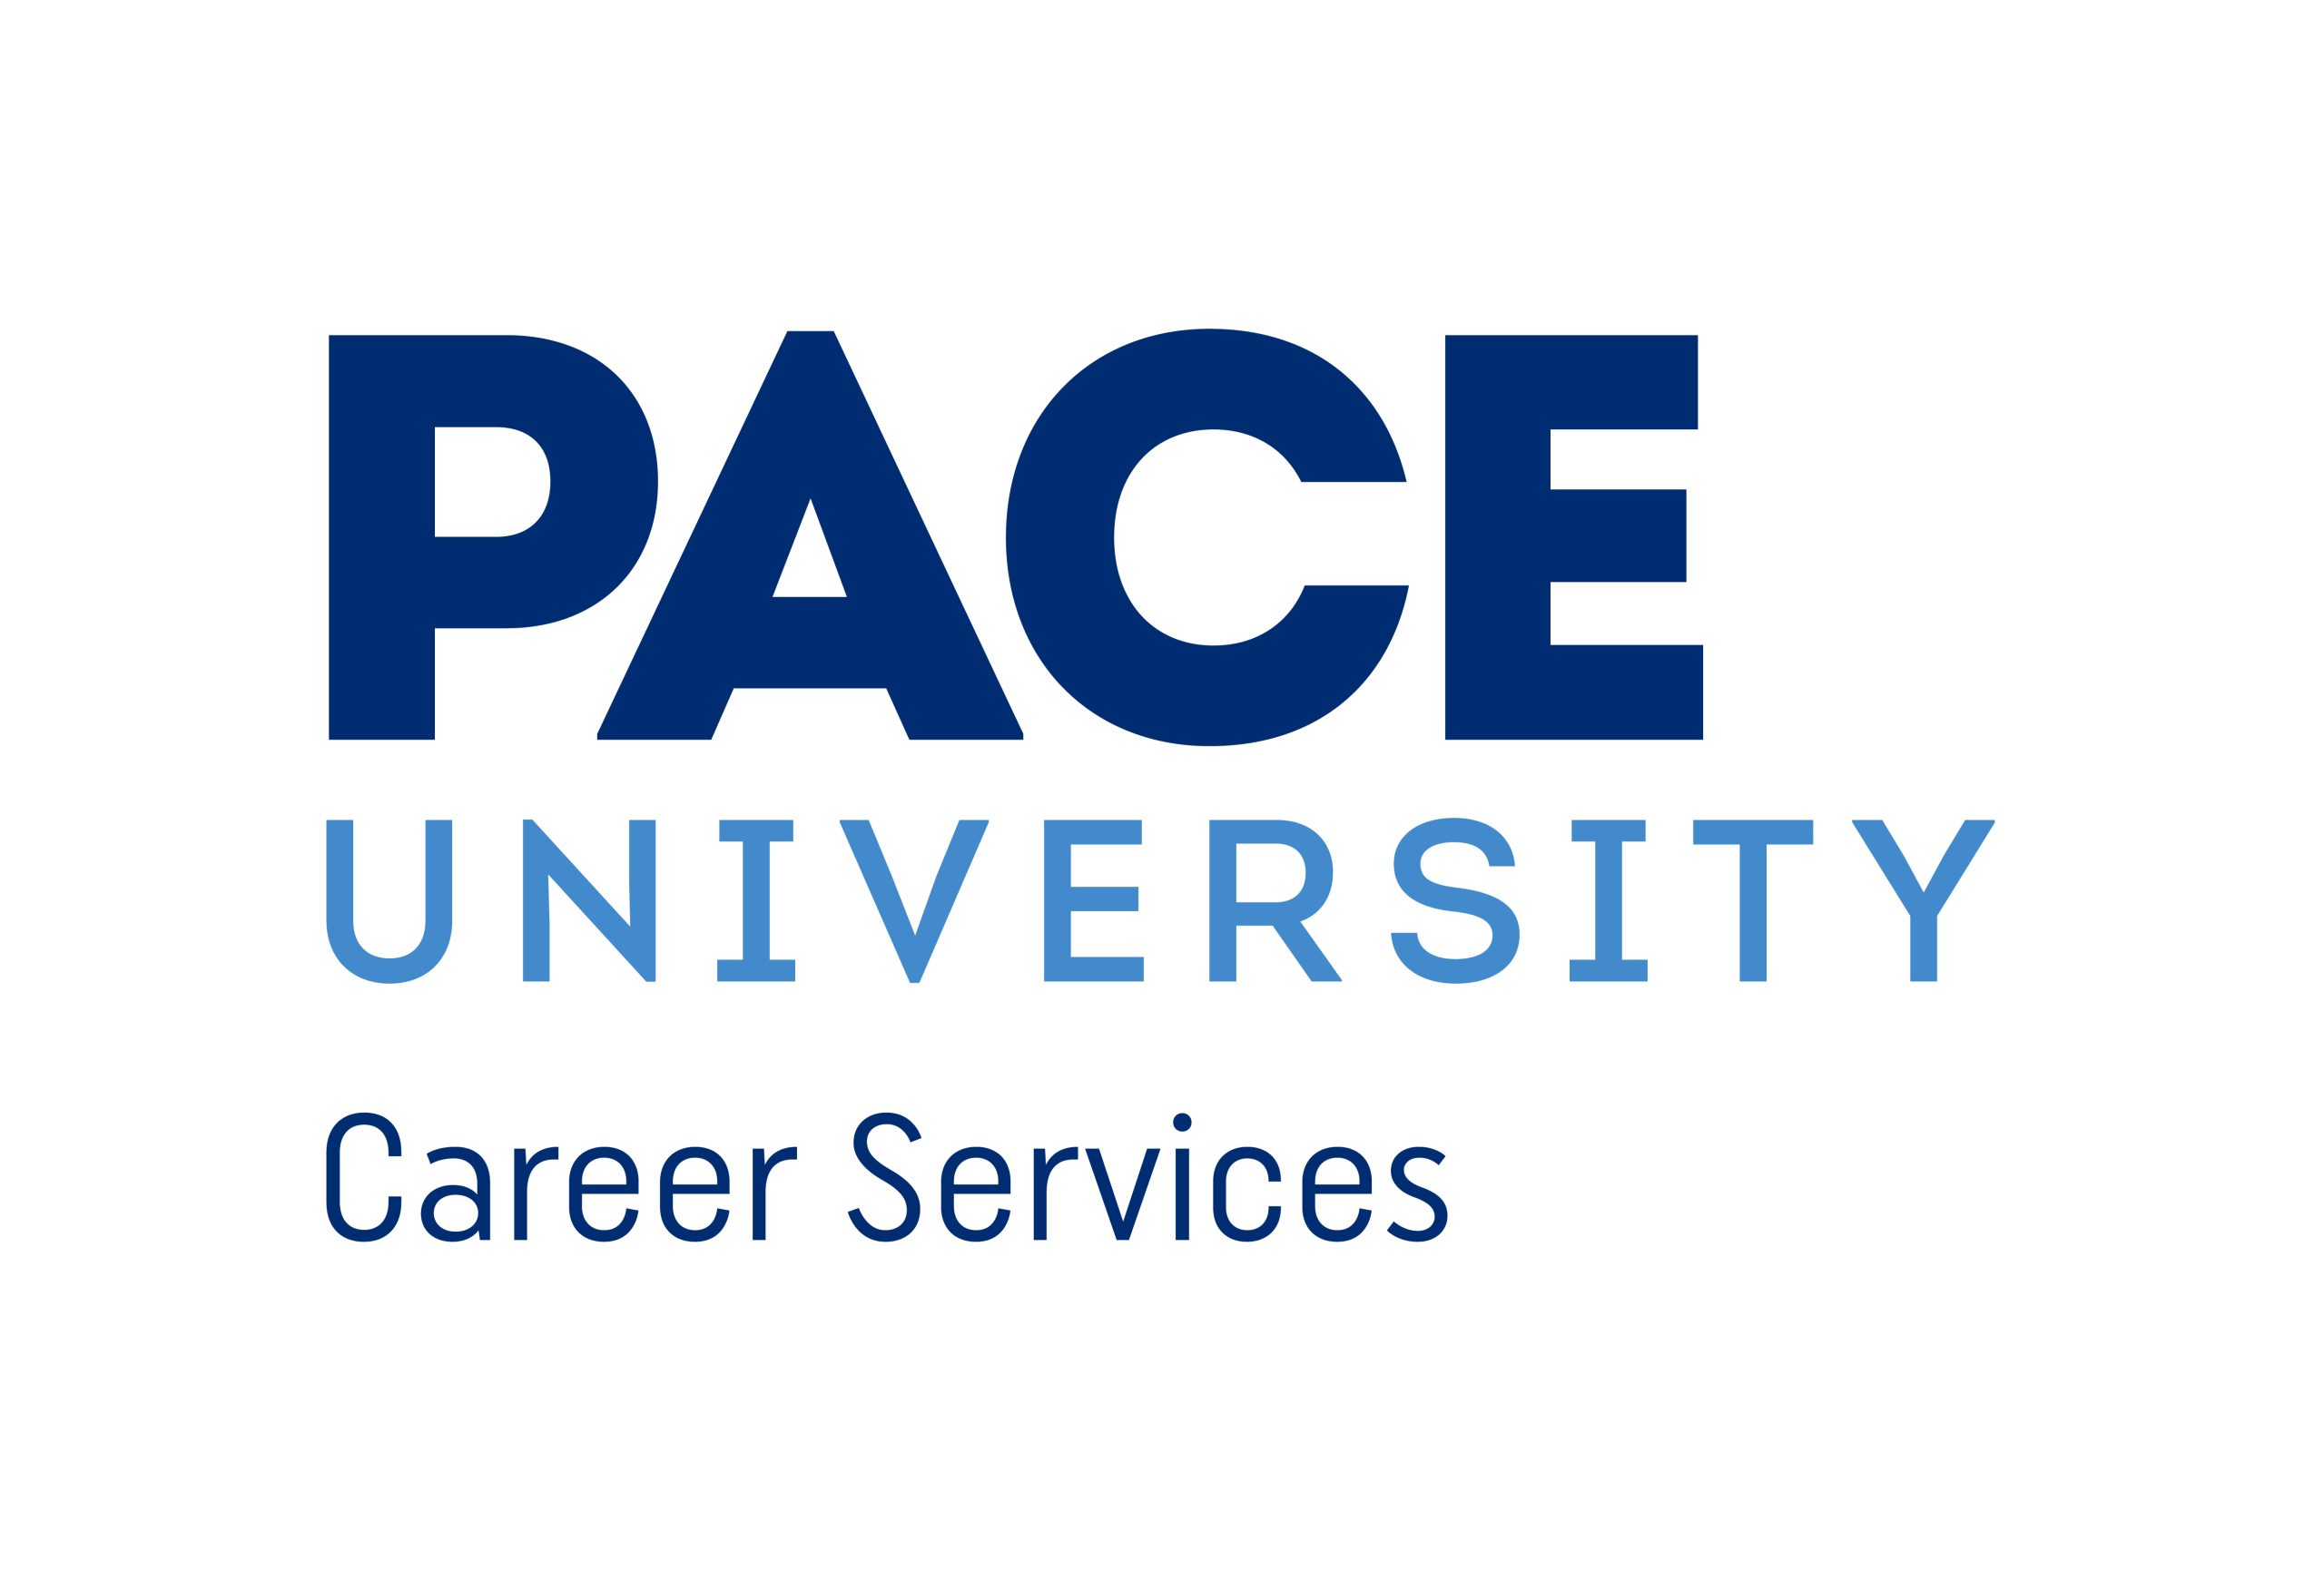 Pace University career services